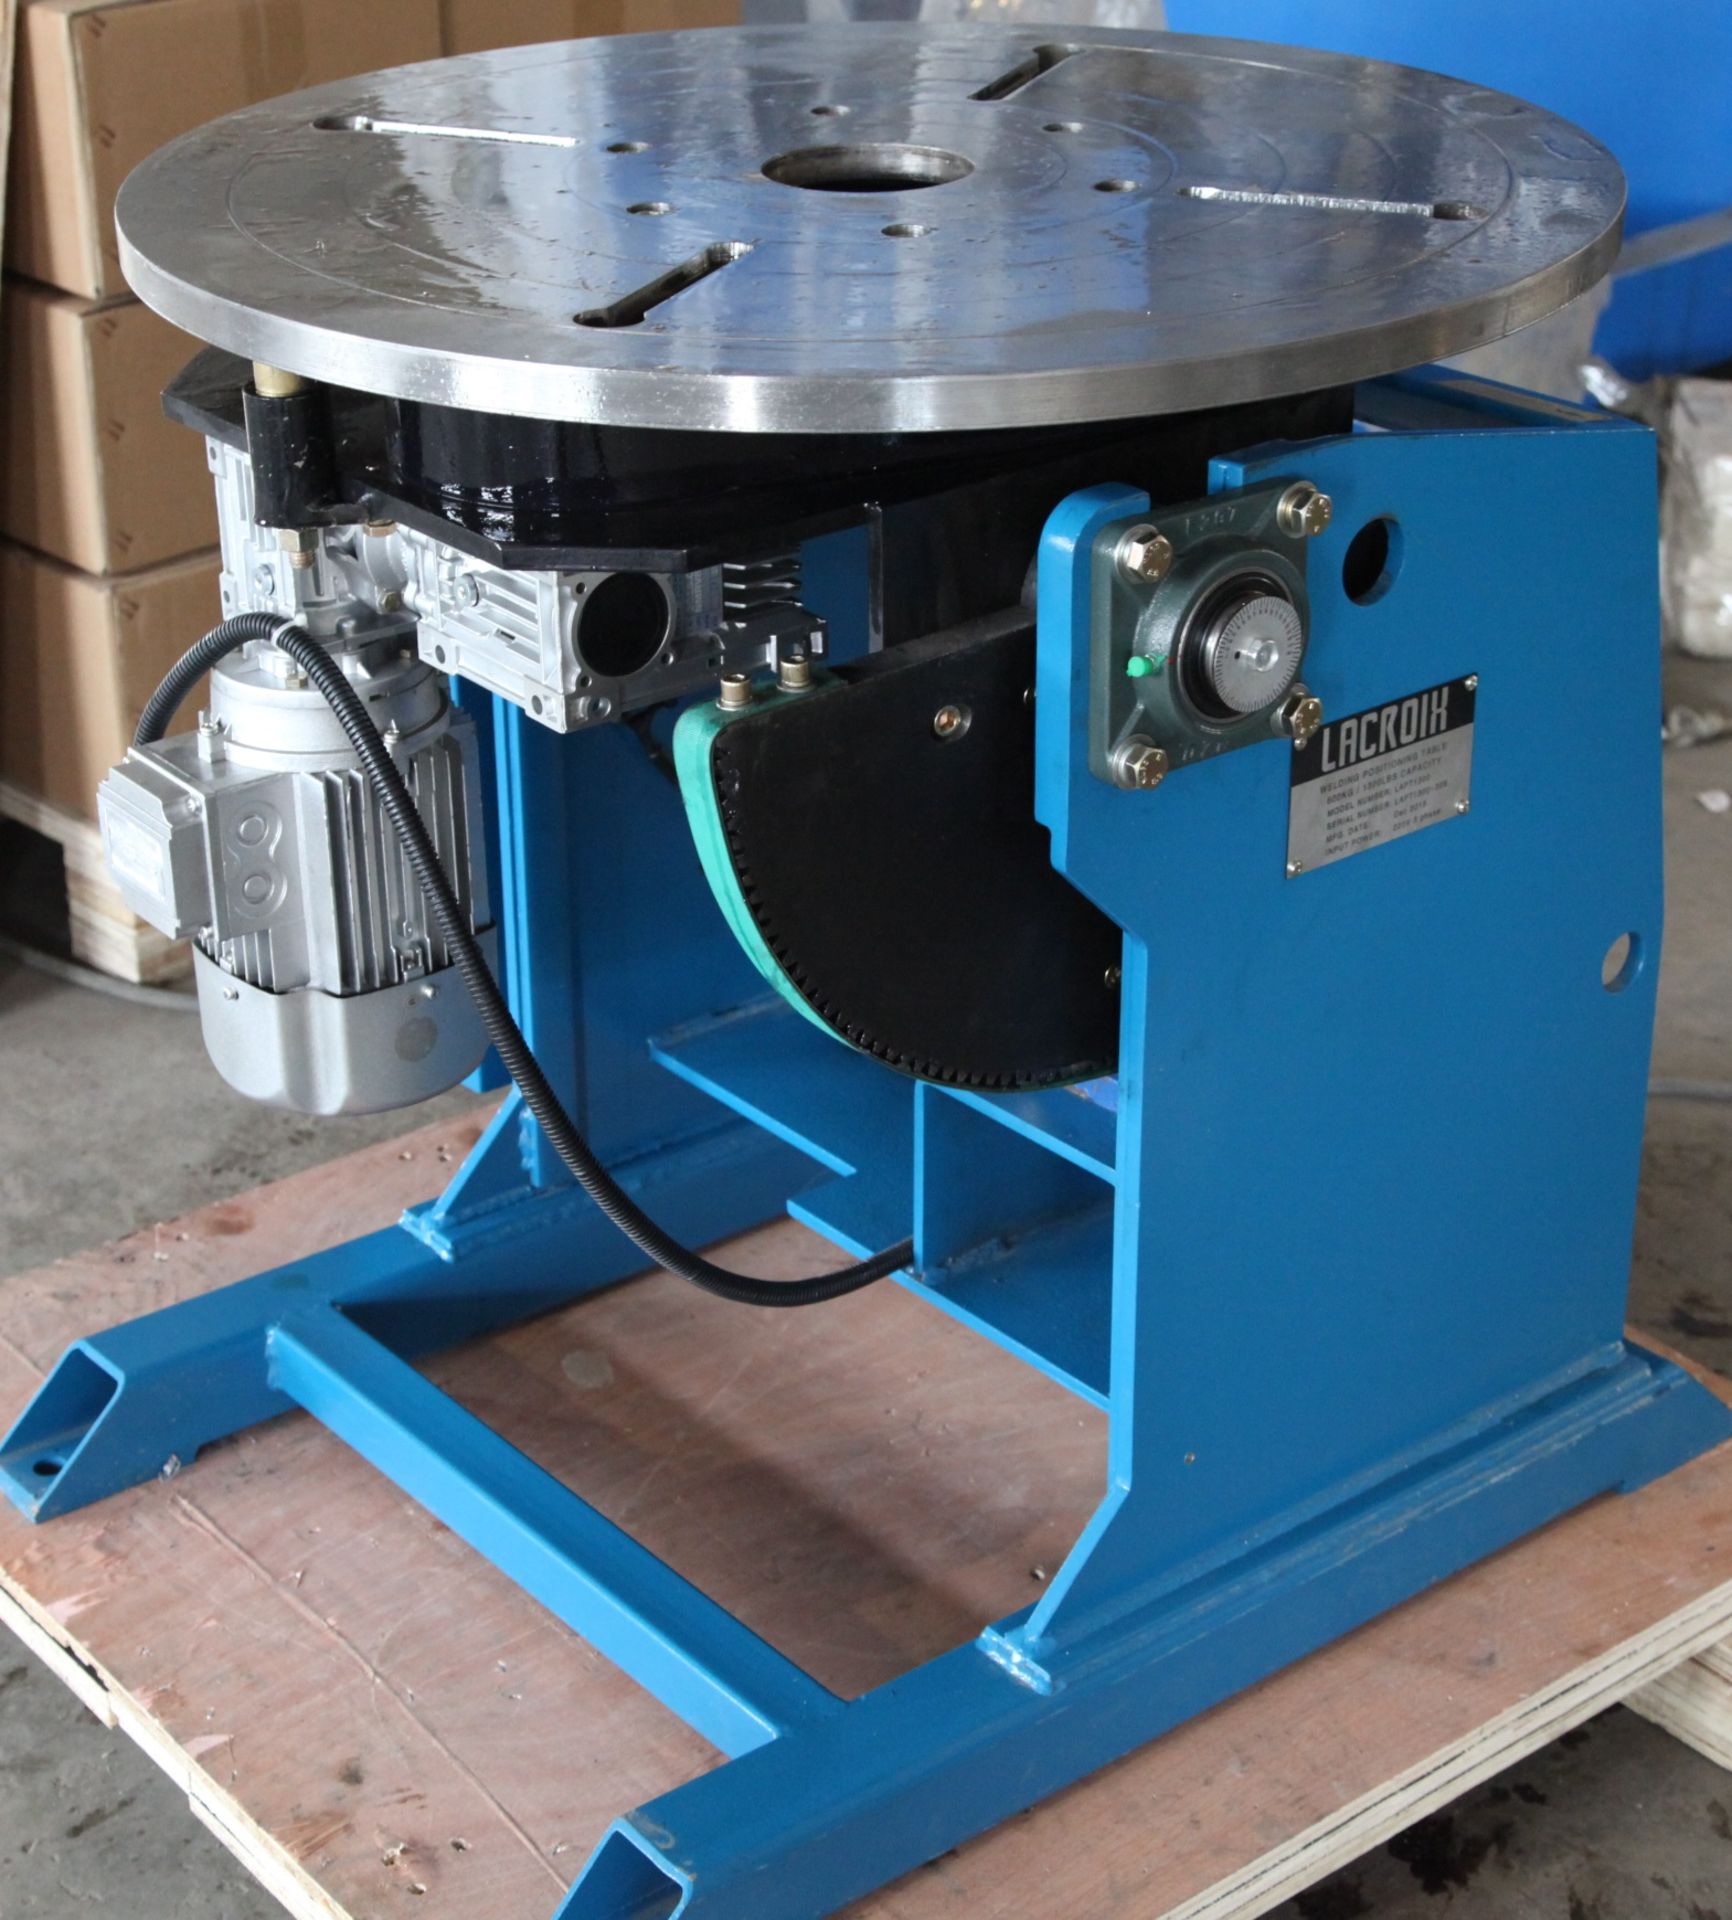 Mint Lacroix Welding Positioner 1300lbs / 600kg Capacity, Full rotation & tilt capability with